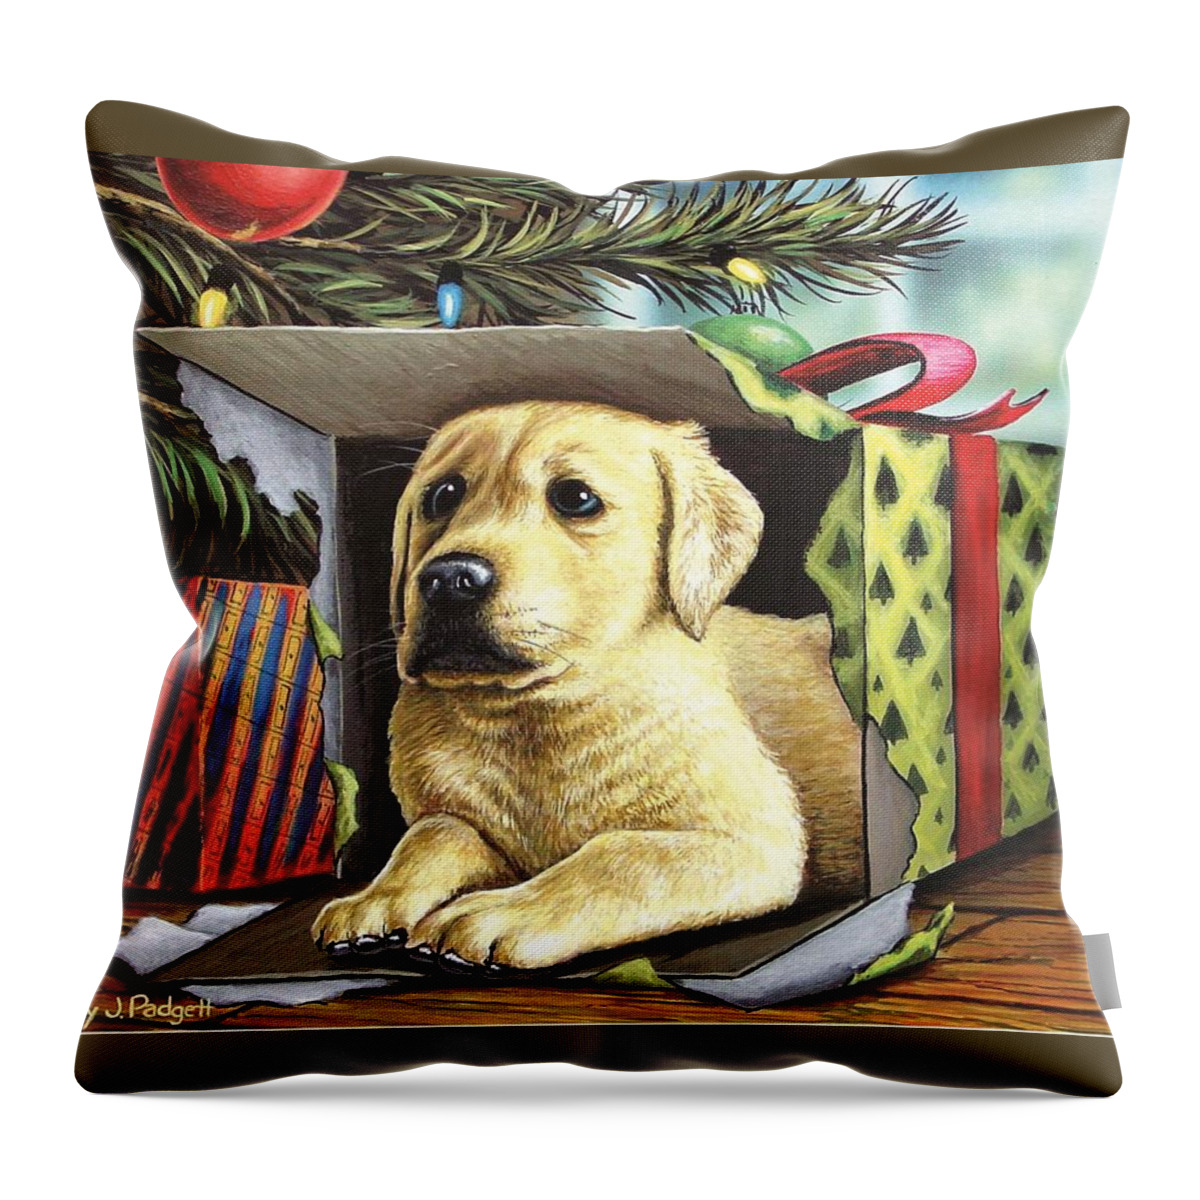 Yellow Lab Throw Pillow featuring the painting Christmas Pup by Anthony J Padgett